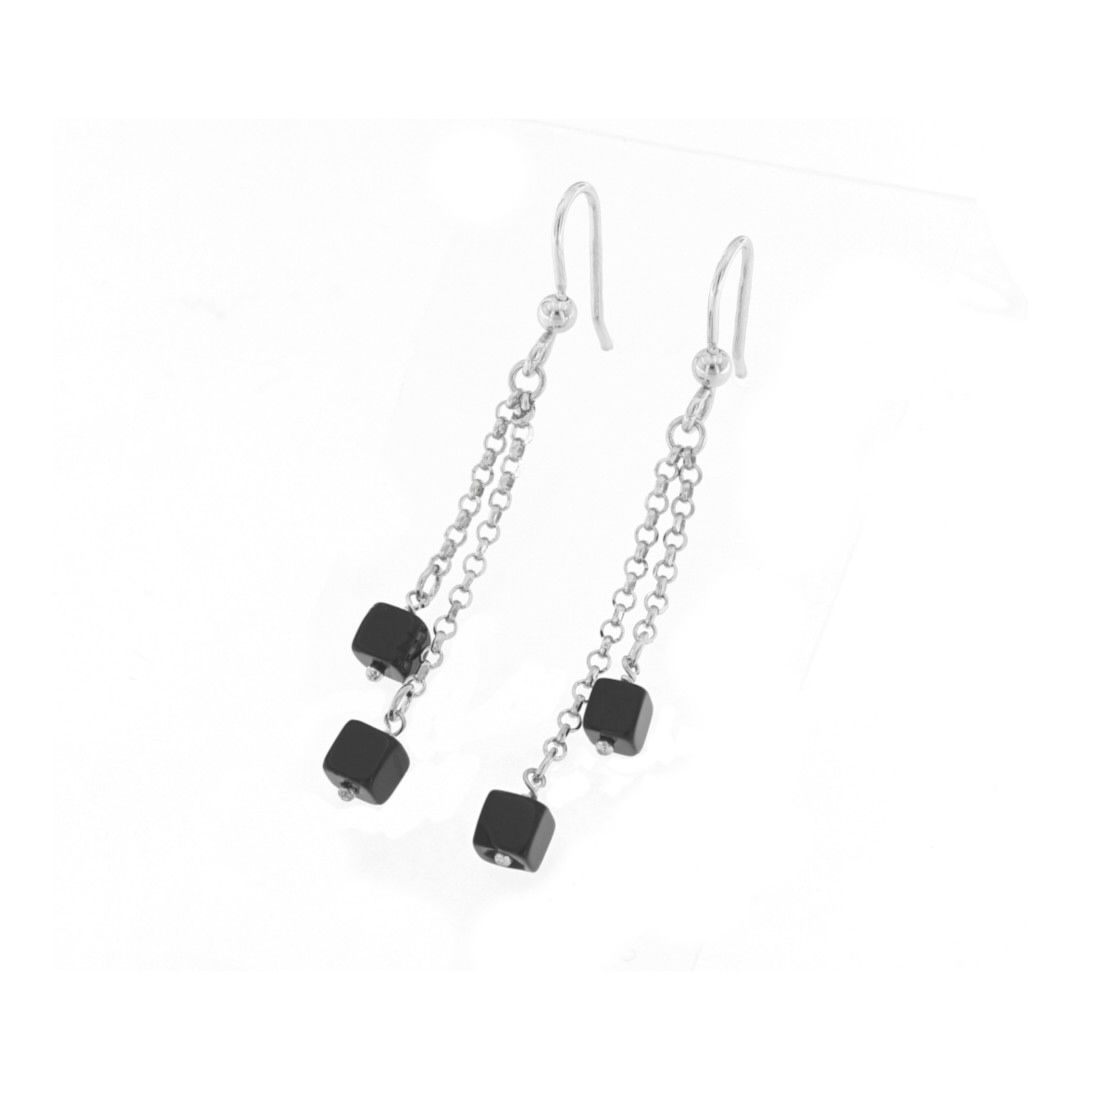 DOUBLE SILVER AND ONYX EARRINGS